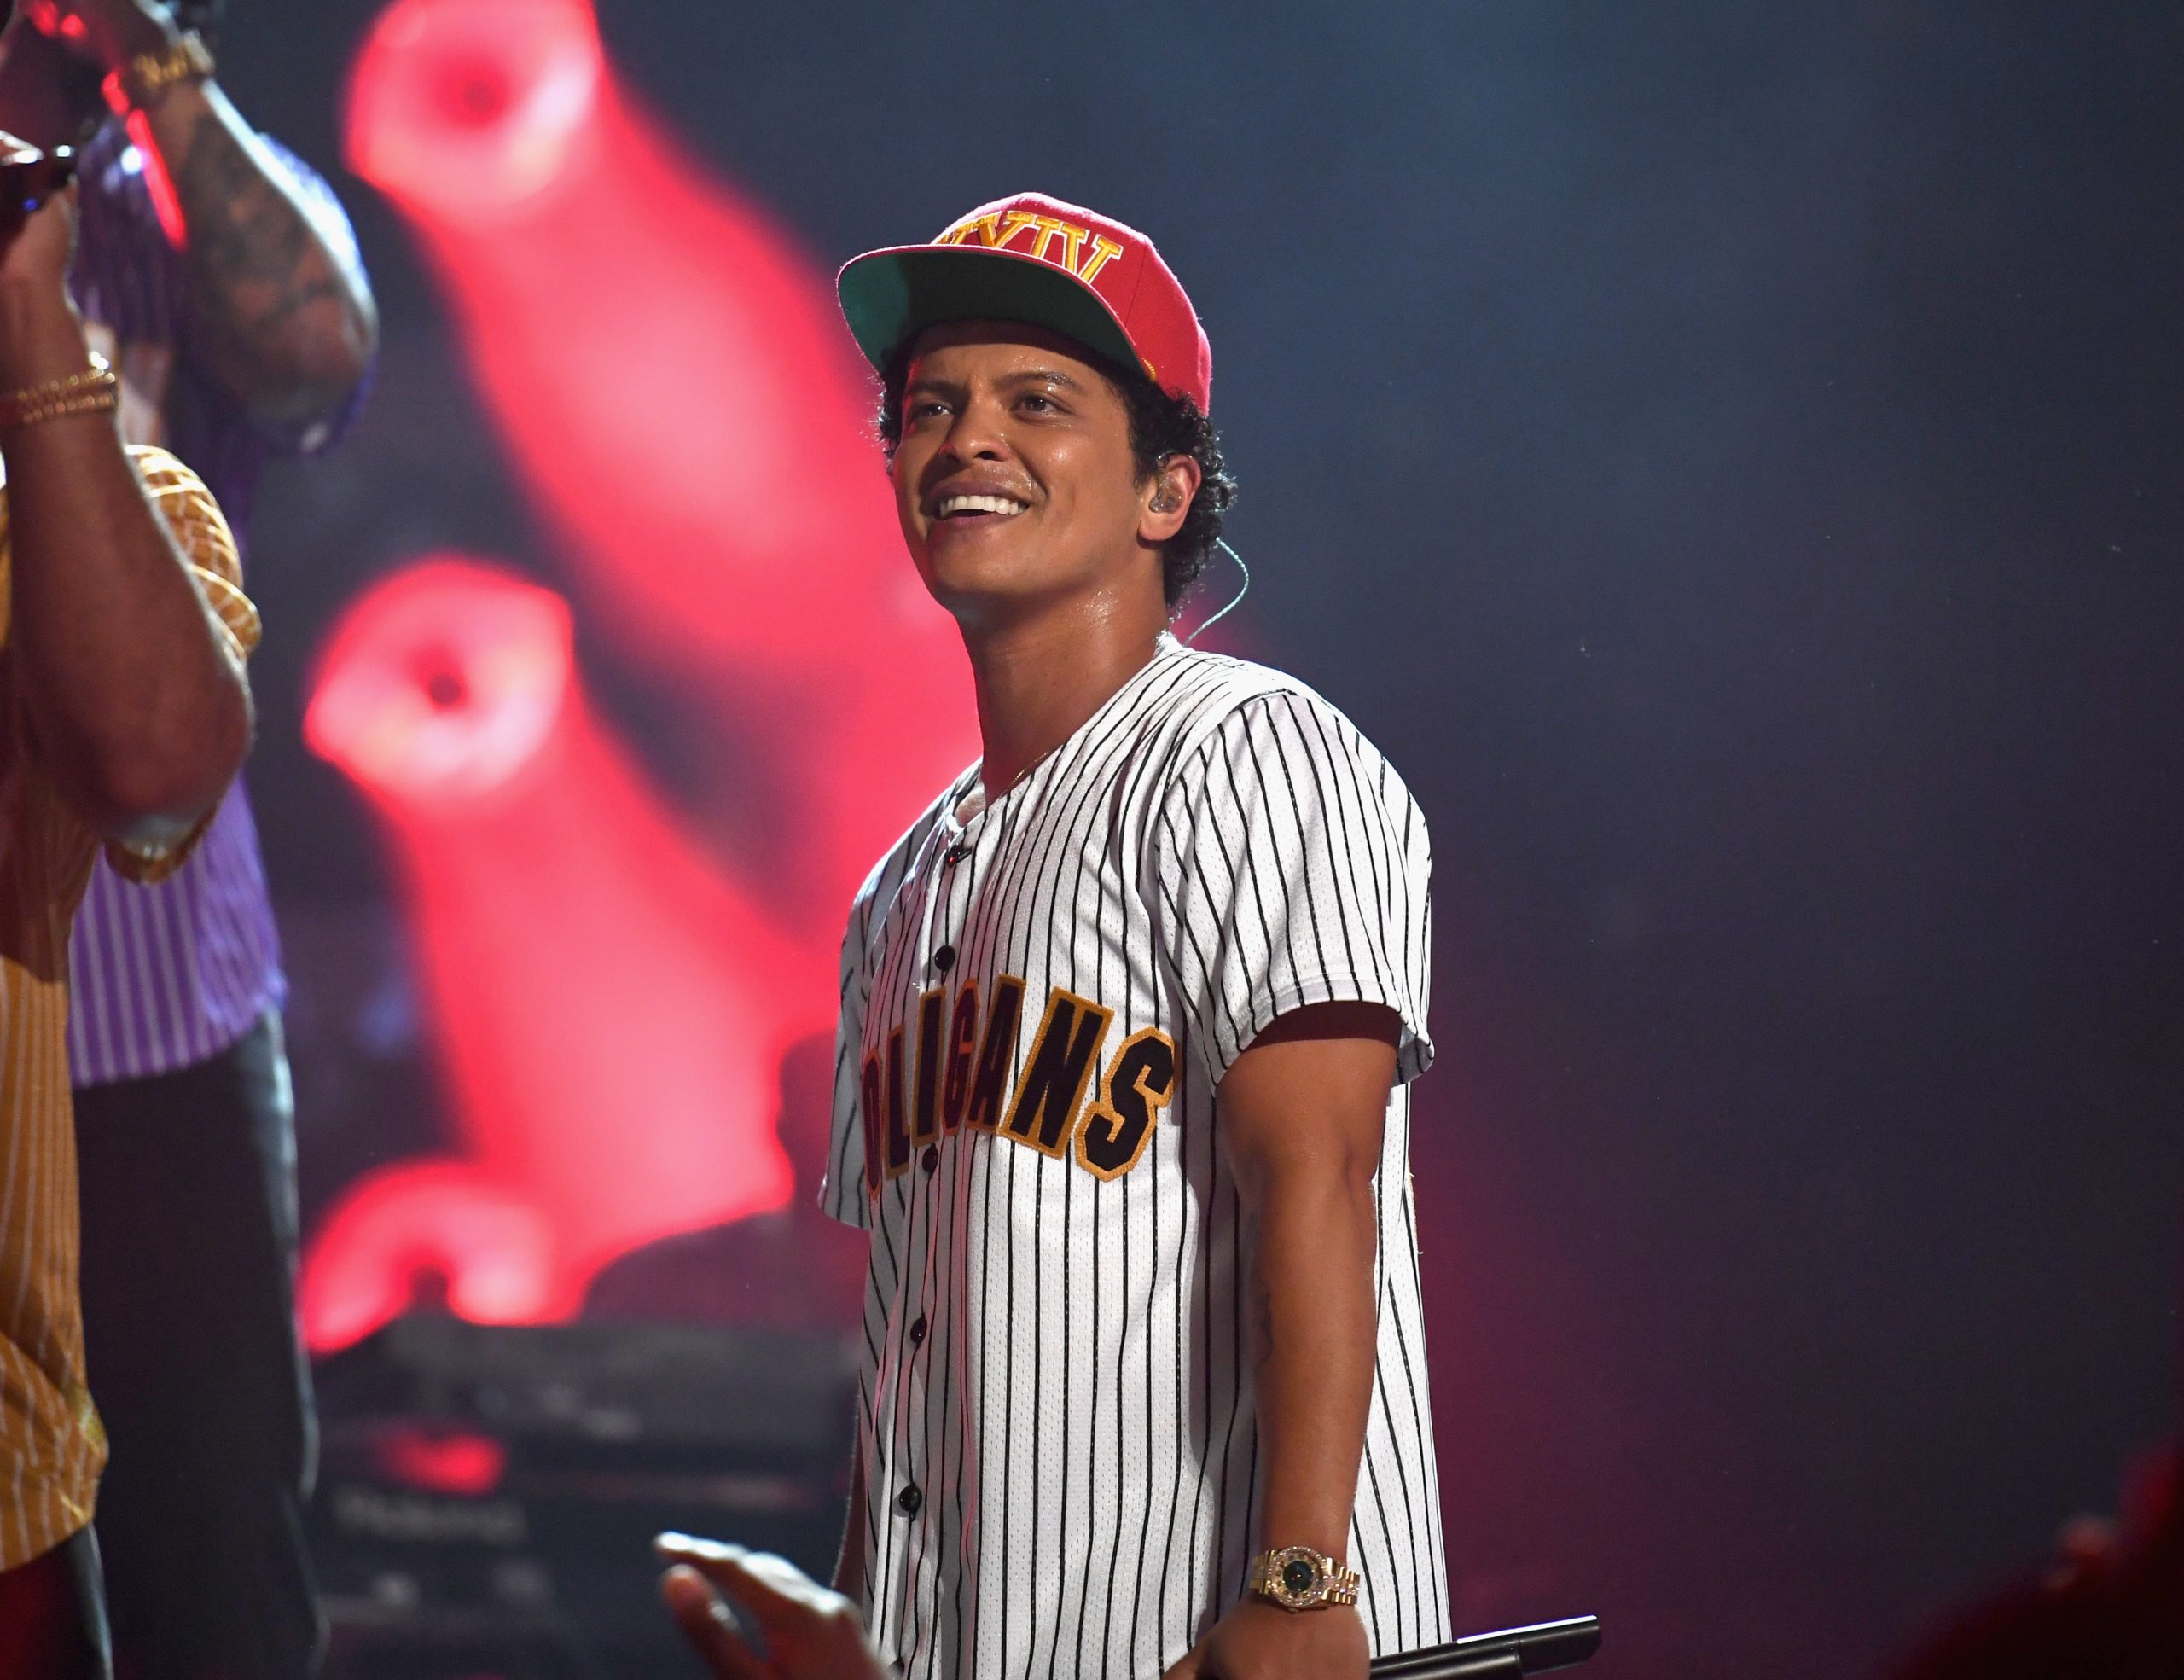 A Man Pretending To Be Bruno Mars Was Arrested After Scamming A 65-Year-Old Woman Out Of $100K